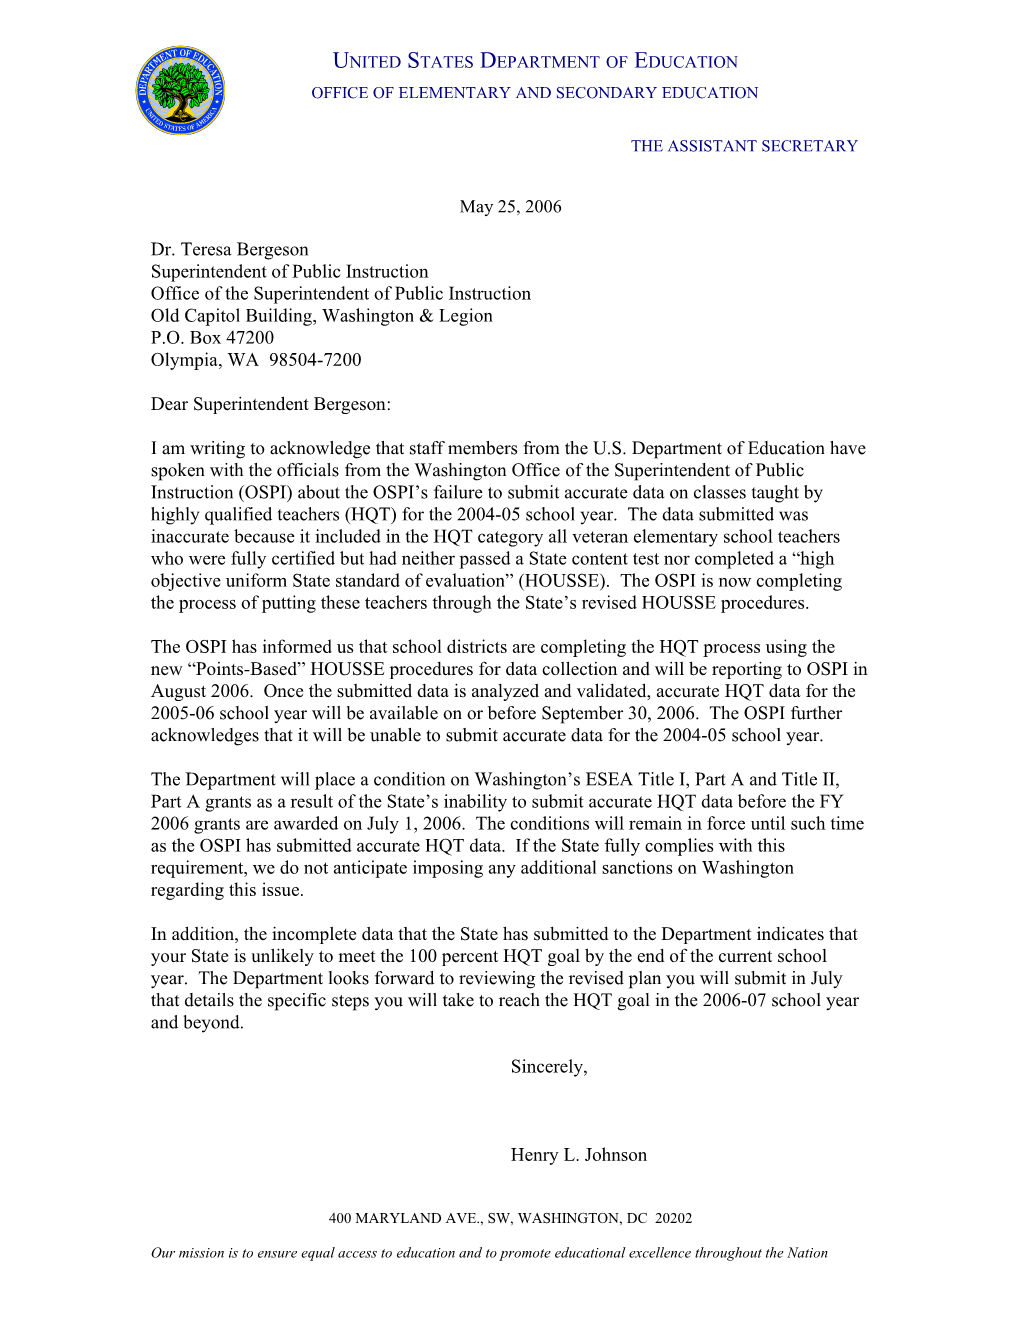 Letter to Washington Superintendent of Public Instruction from Assistant Secretary Office